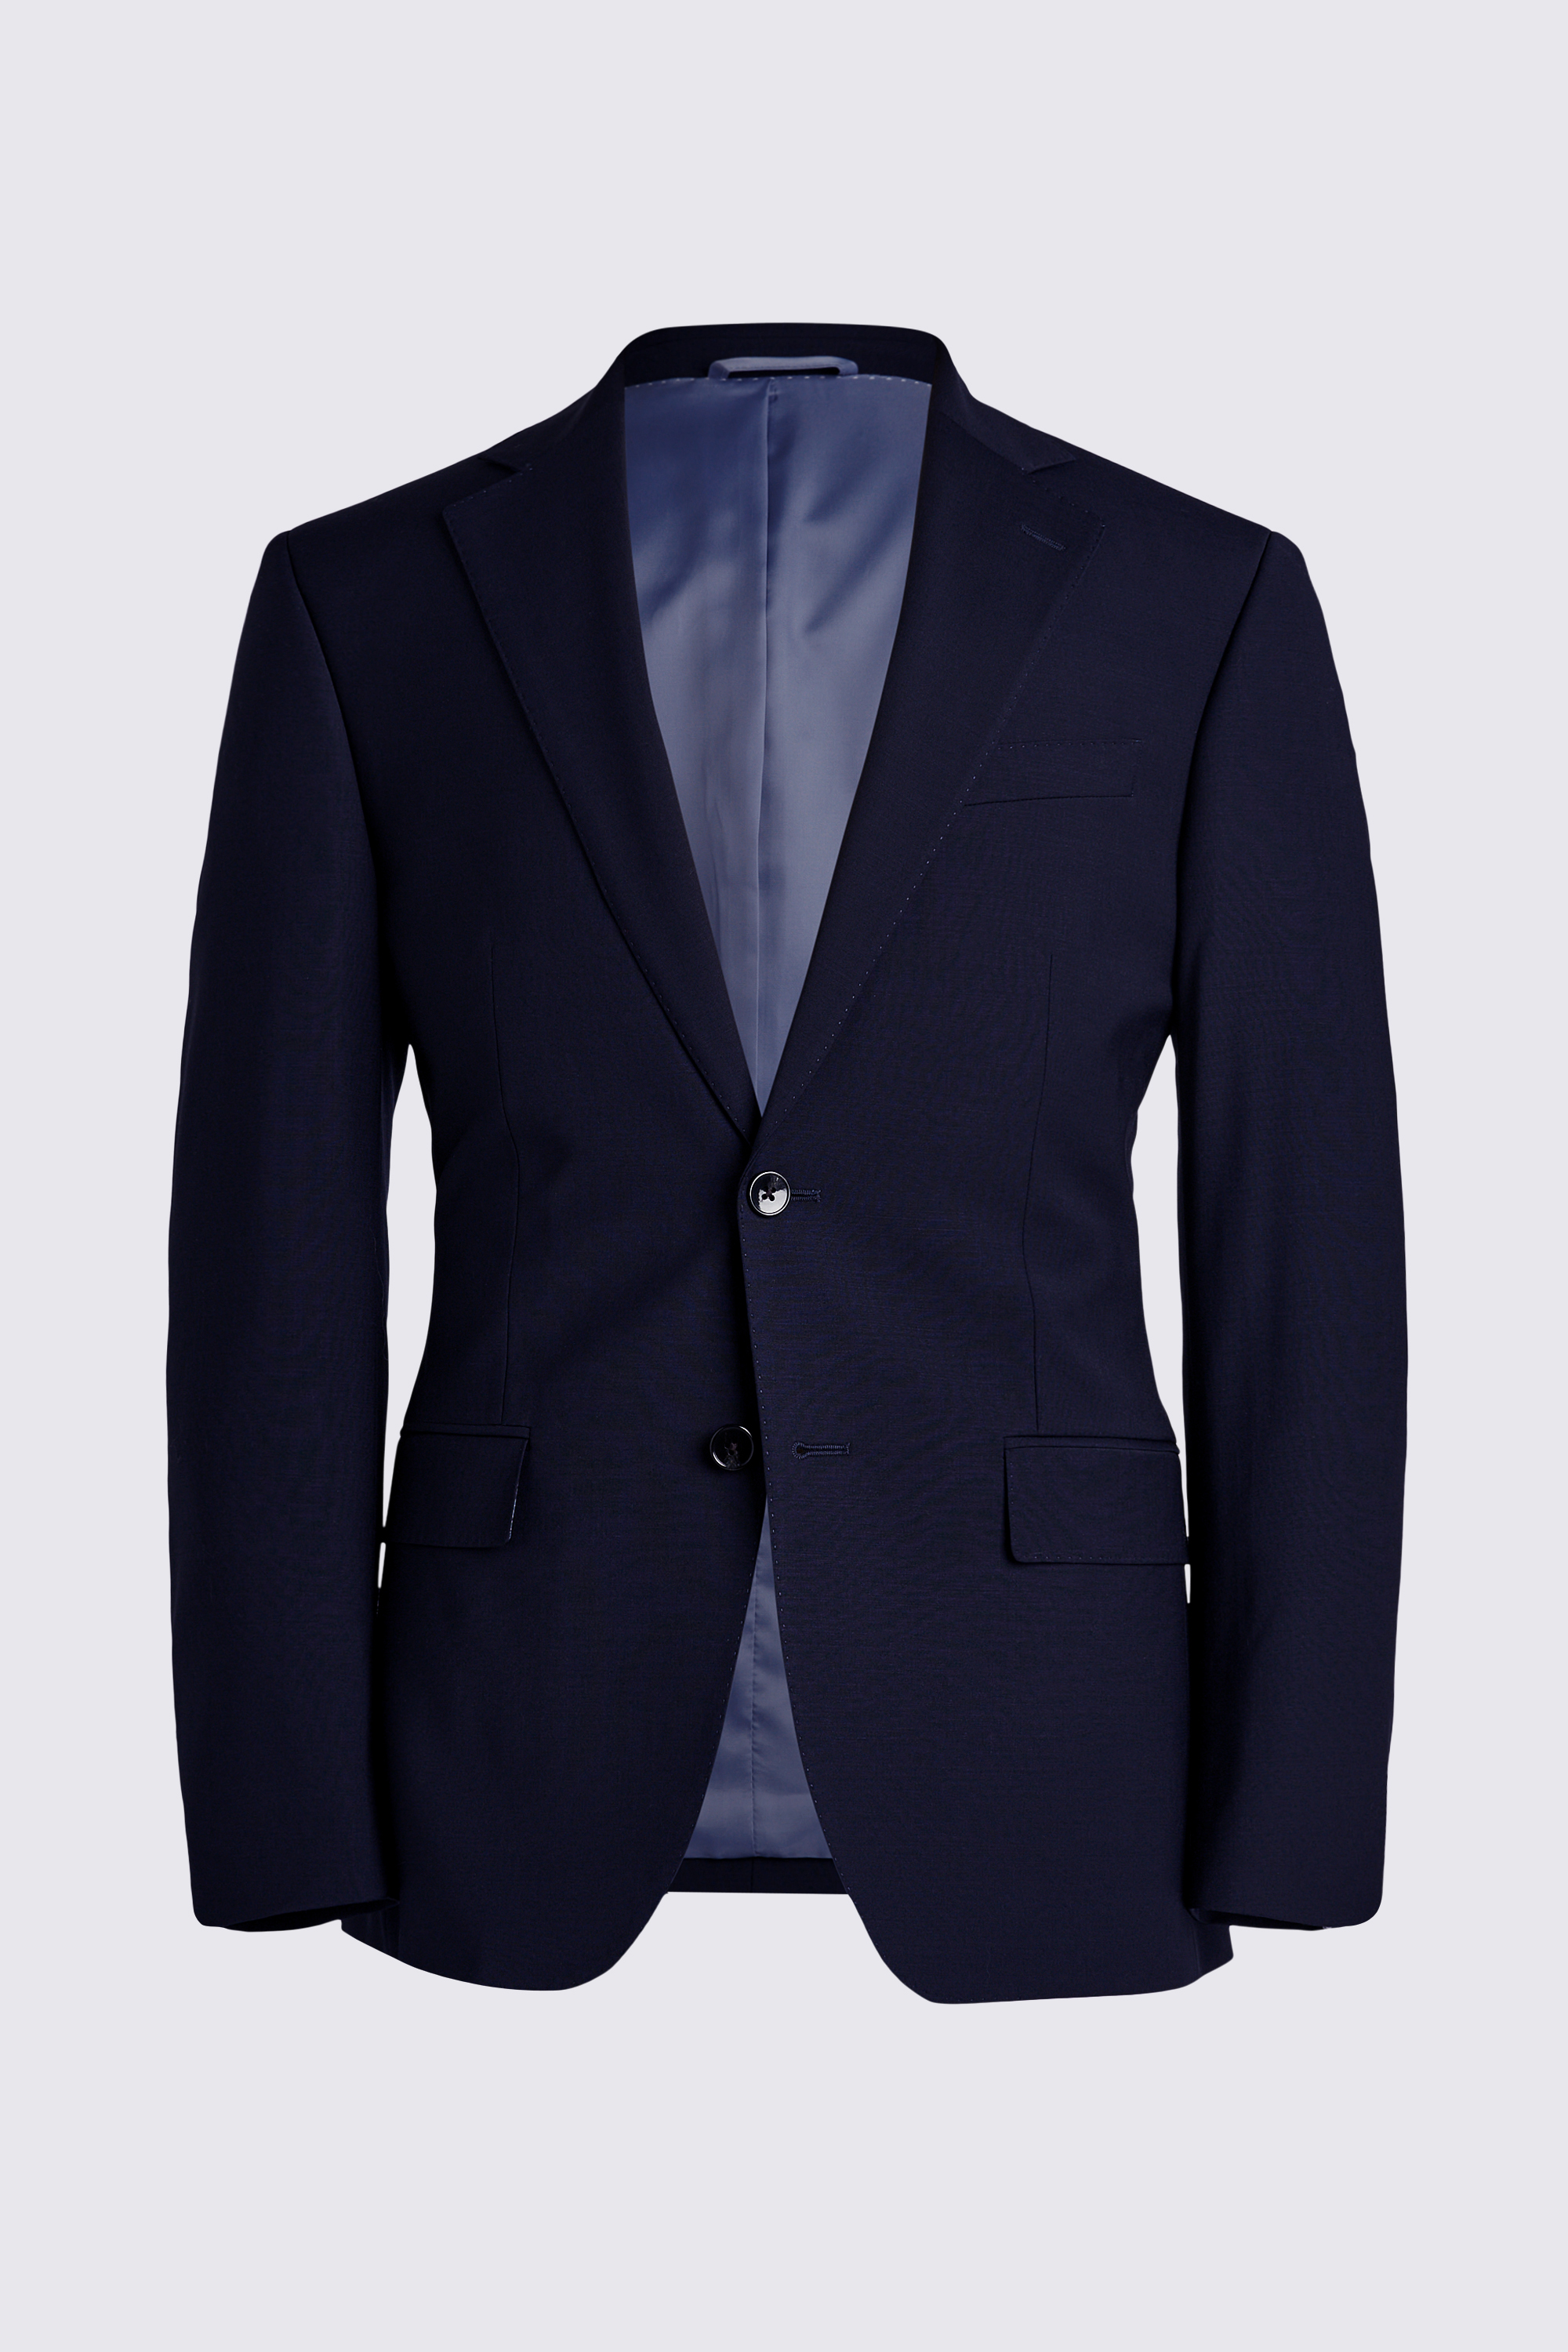 Tailored Fit Navy Black Check Jacket | Buy Online at Moss